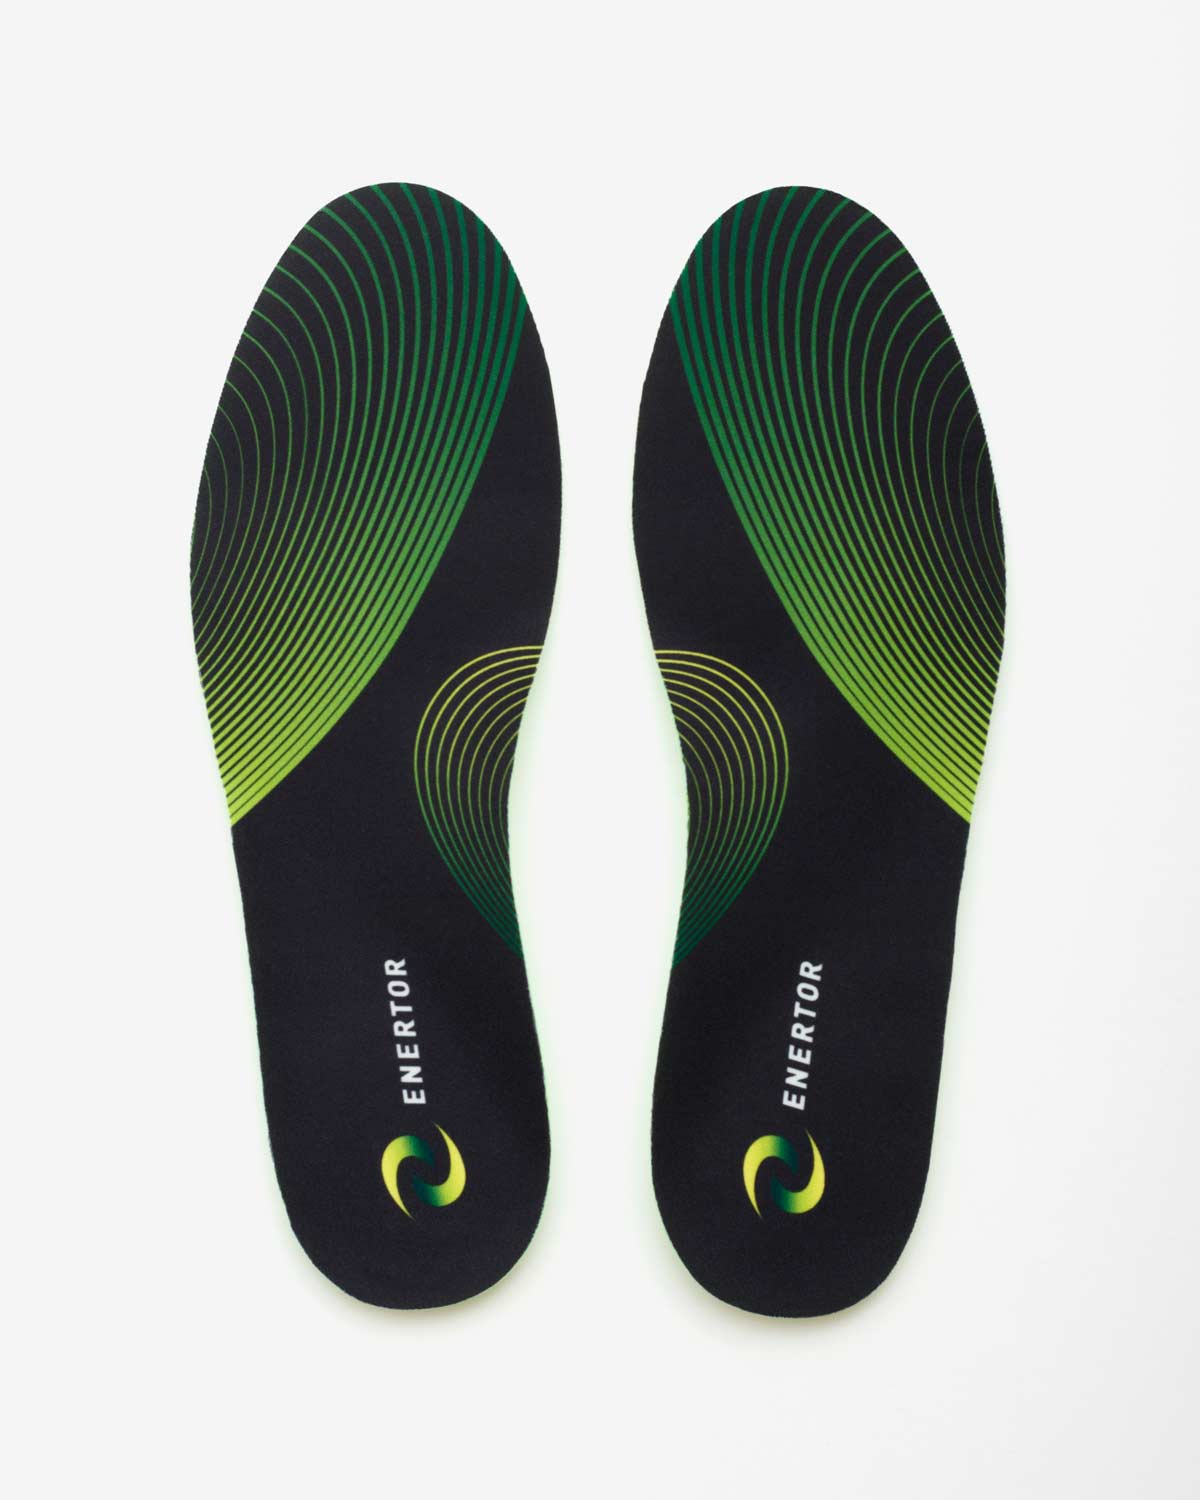 Enertor Running Insoles Twin Pack Top view pattern